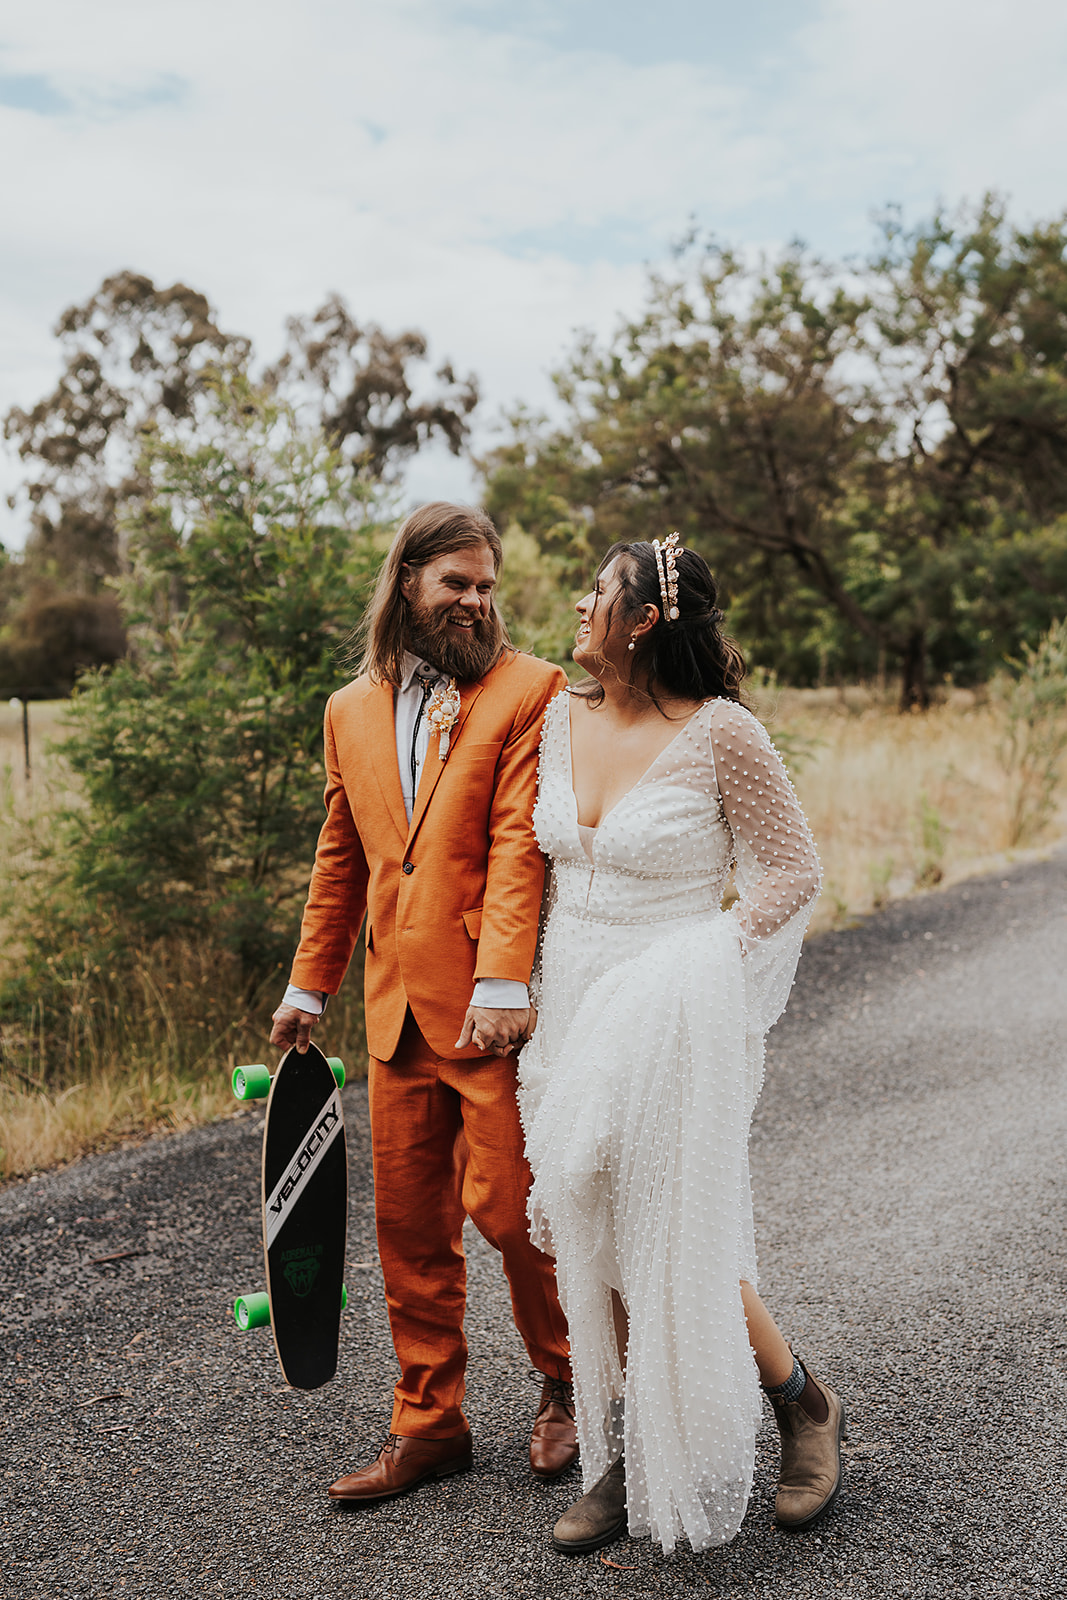 The couple spend time together skate boarding on their elopement day.